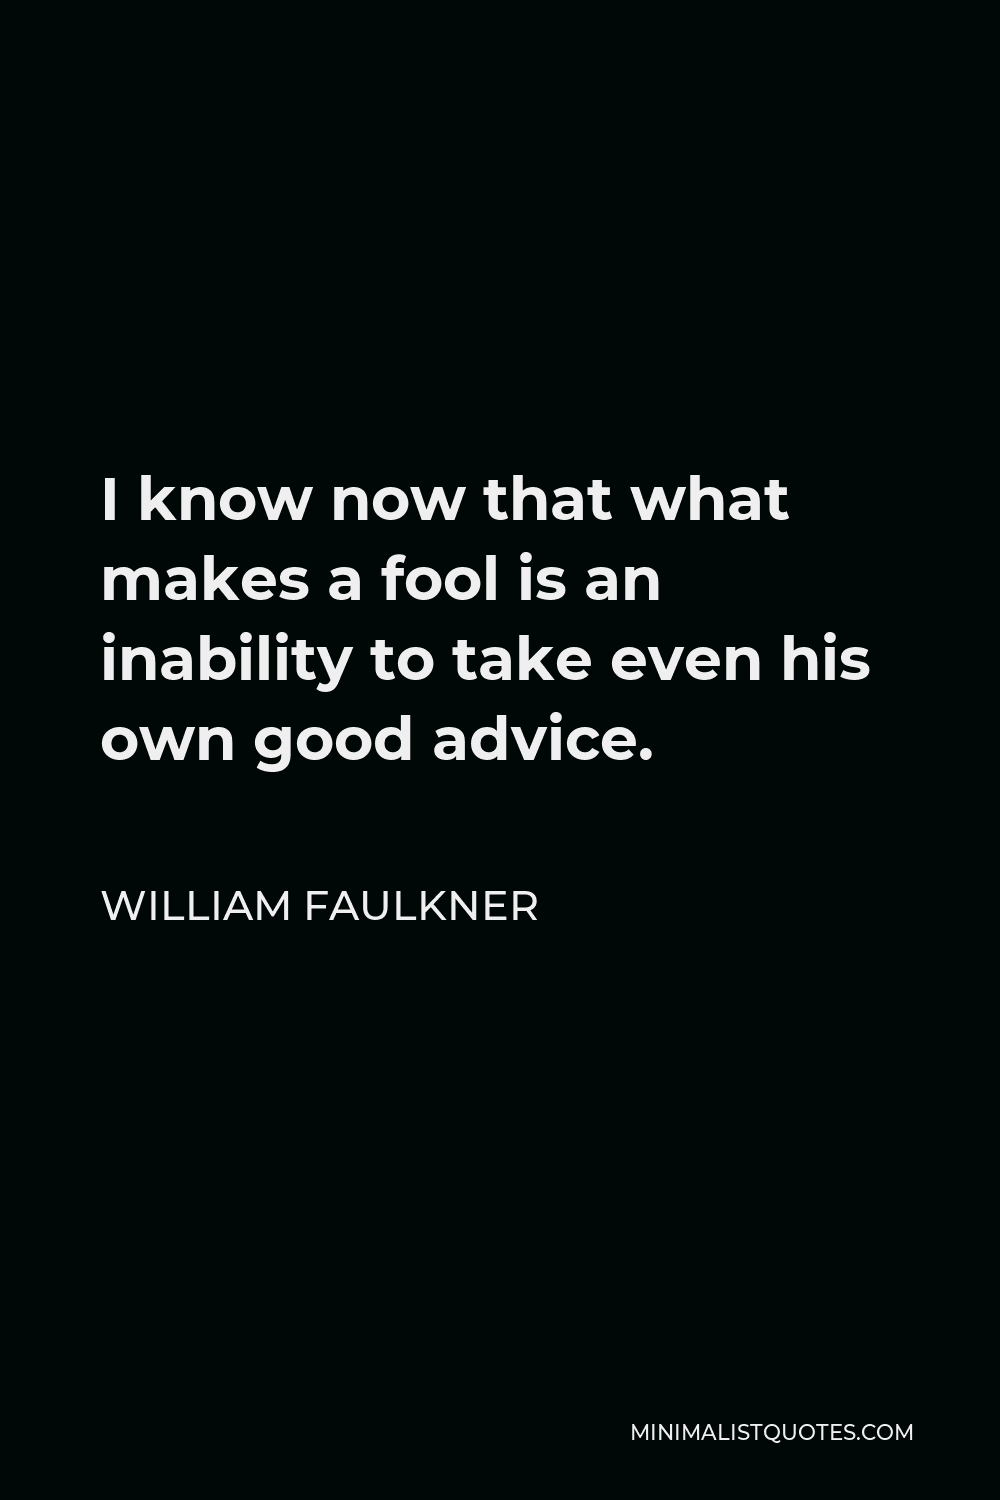 William Faulkner Quote - I know now that what makes a fool is an inability to take even his own good advice.